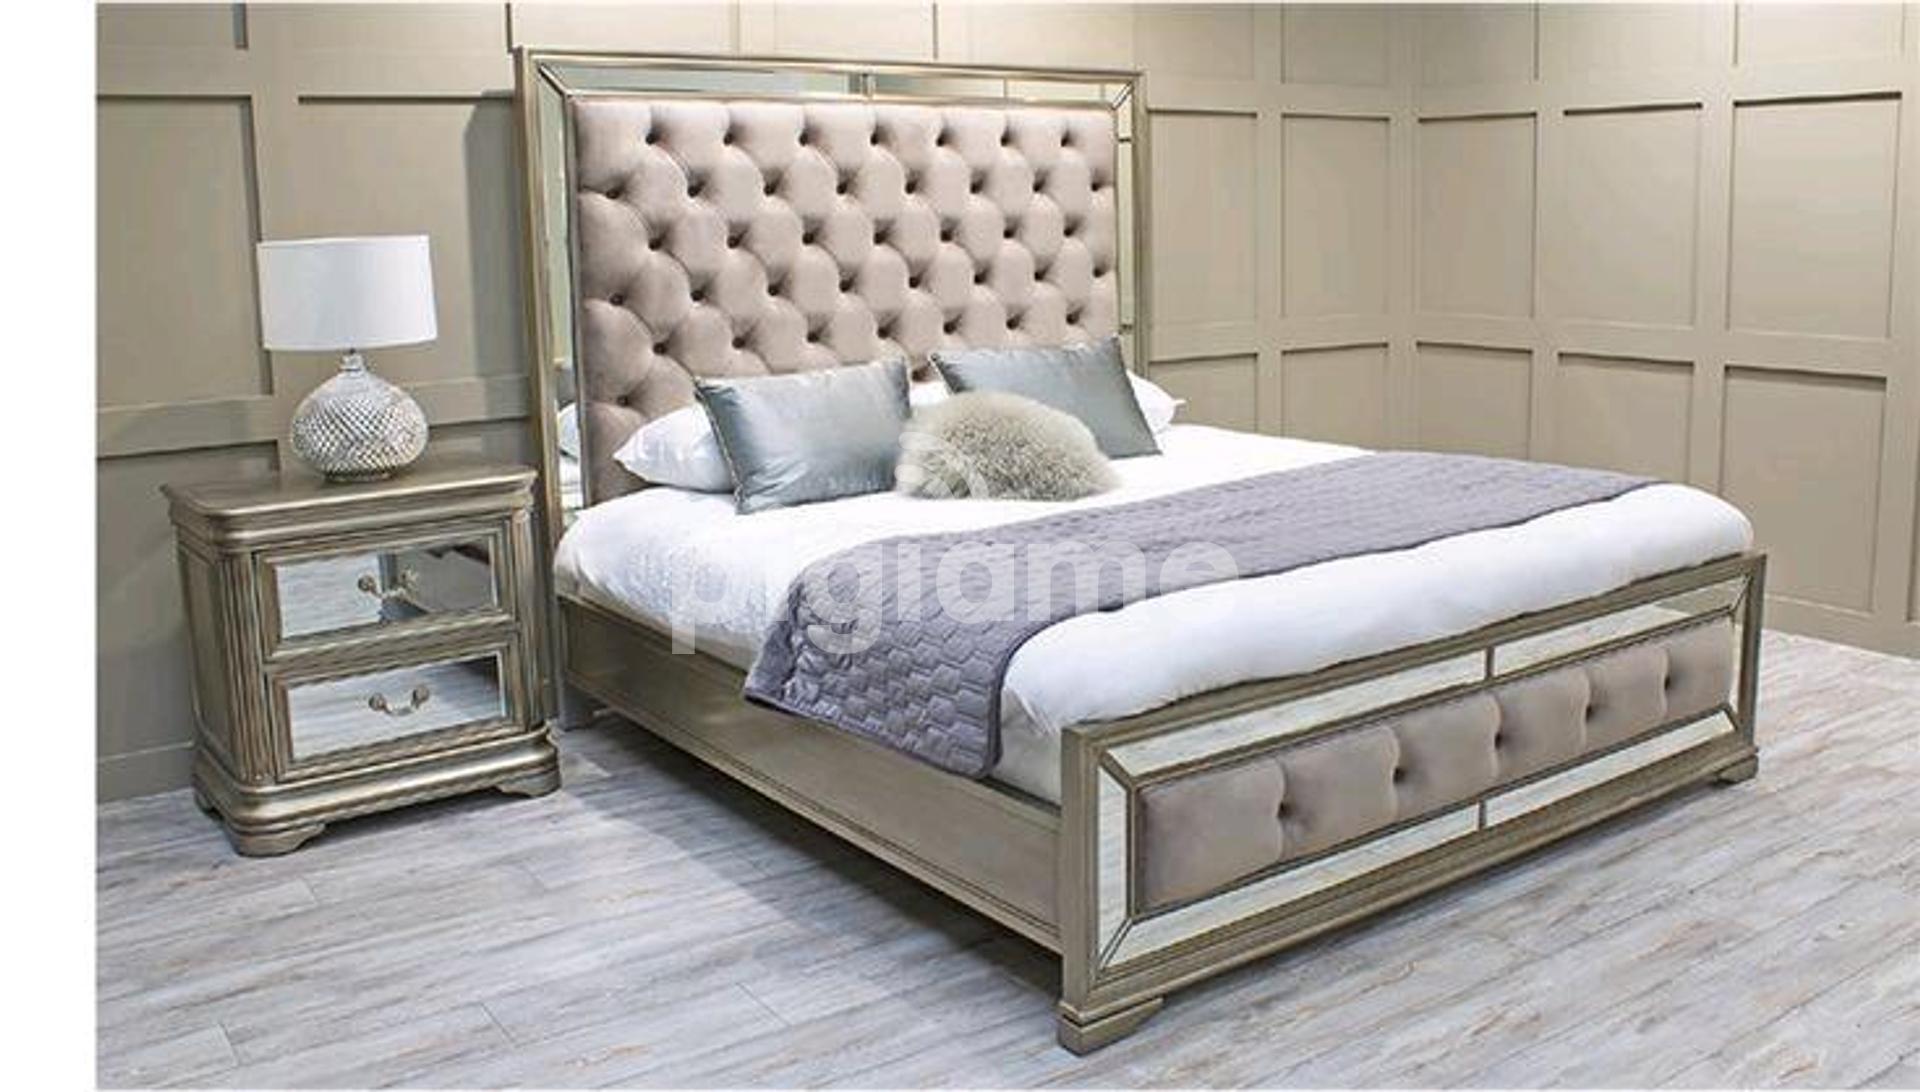 mattresses for super king size beds